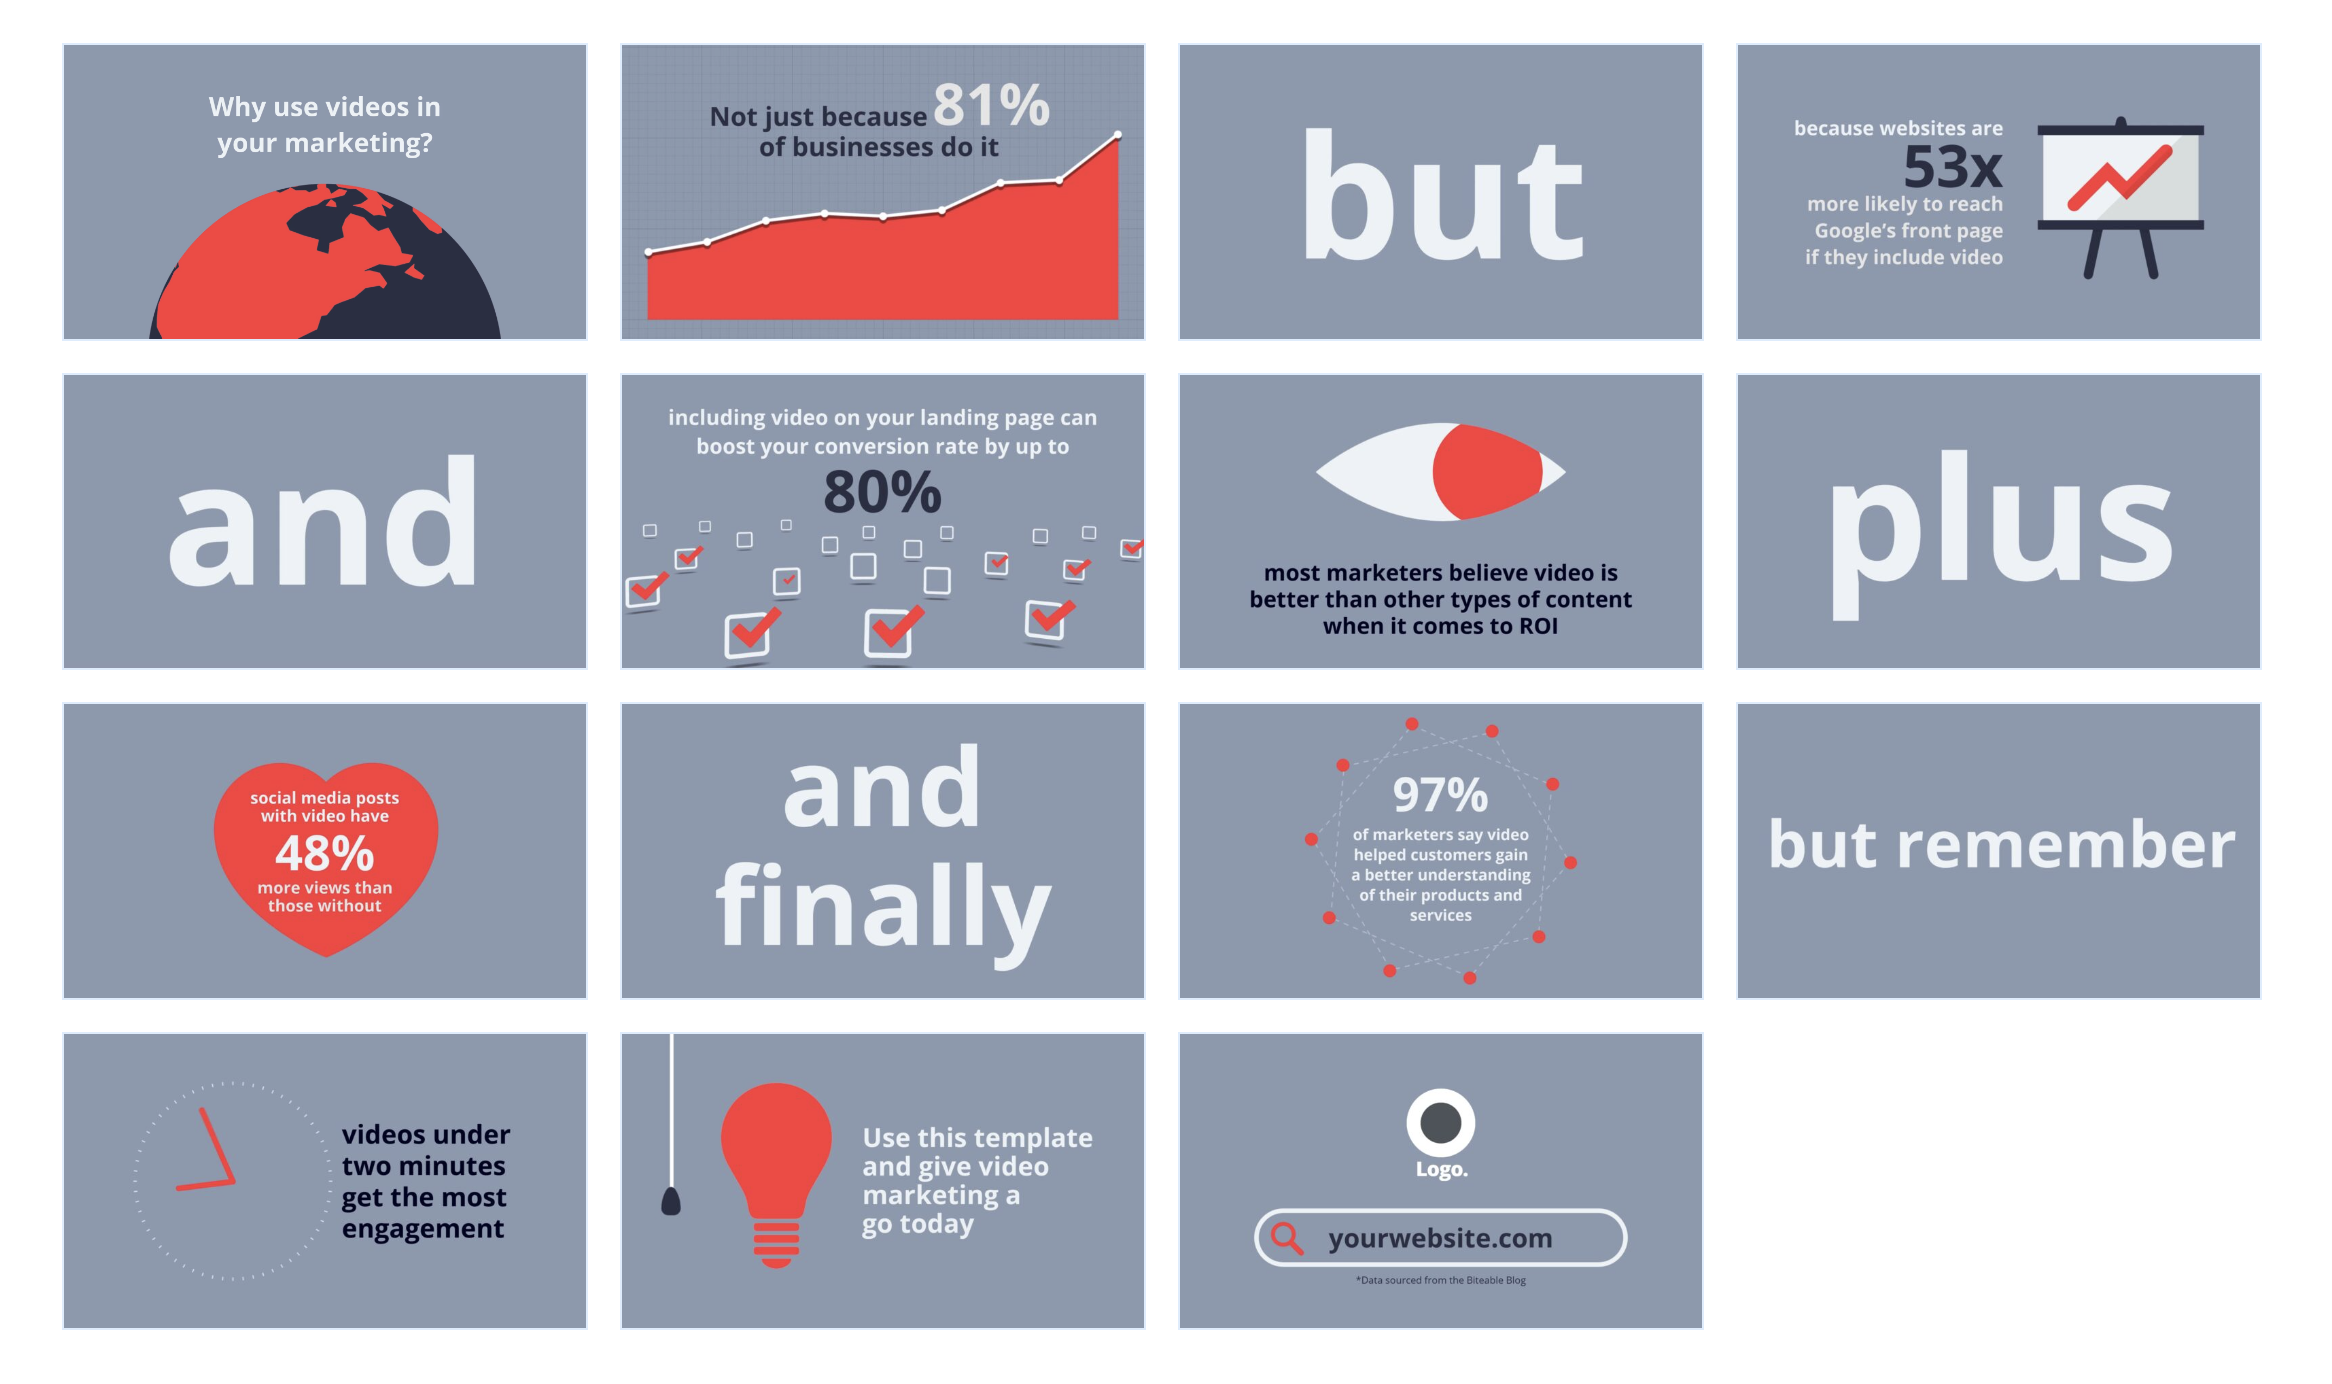 An example of an animated infographic storyboard from Biteable.